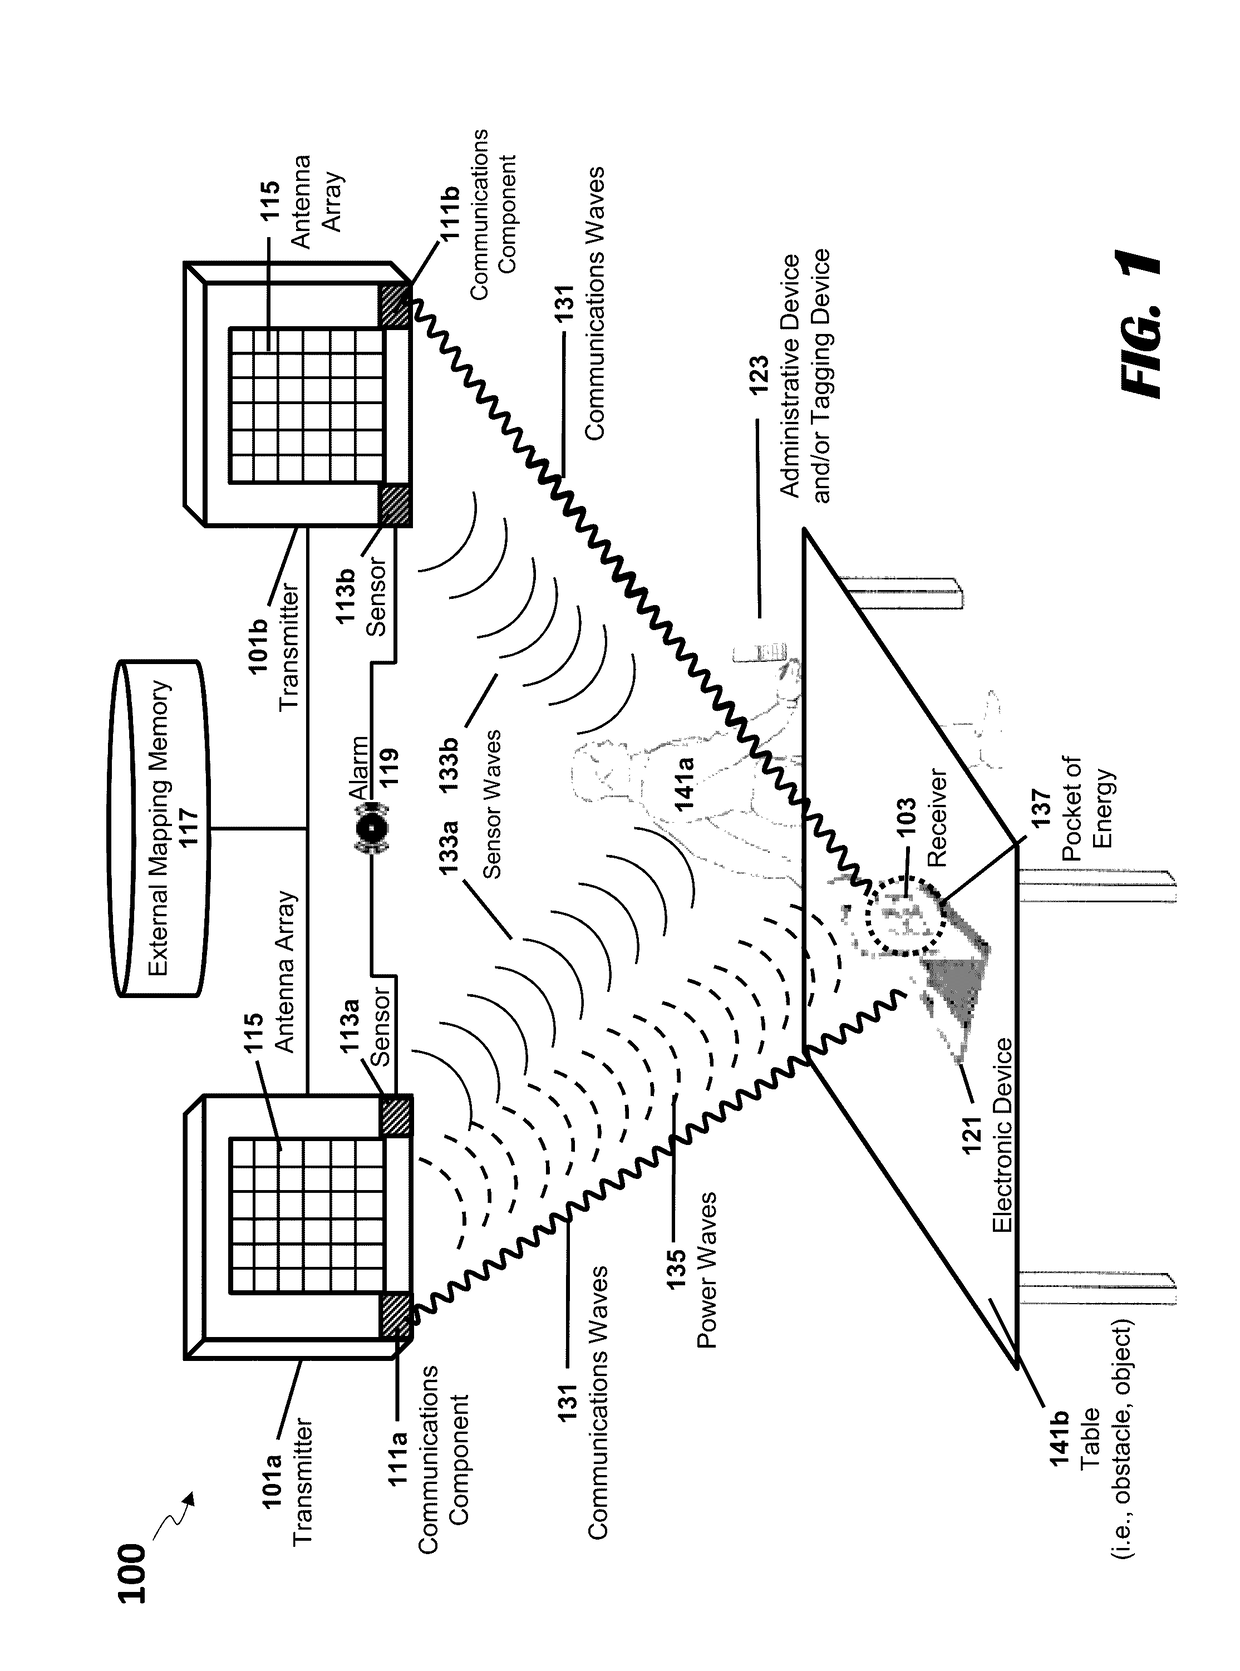 Systems and methods for wireless power charging